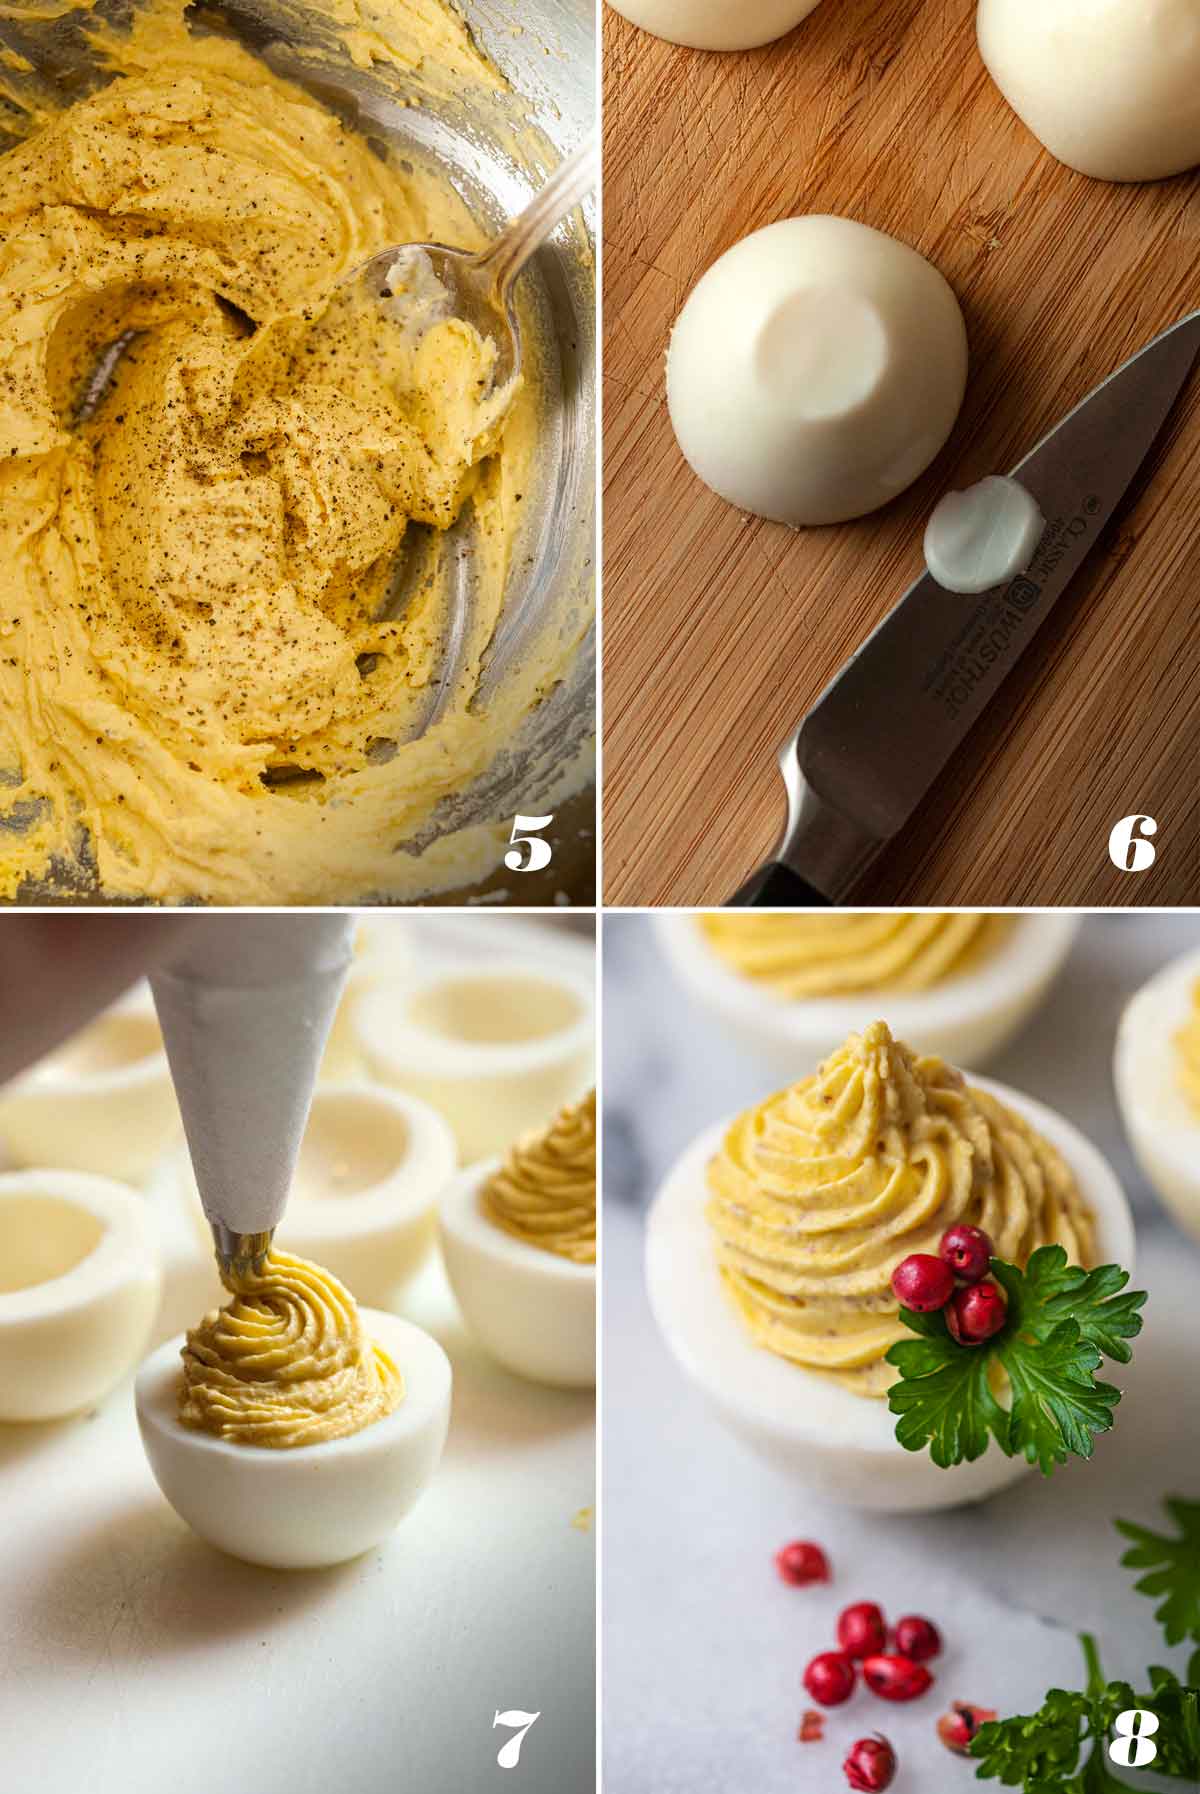 A collage of 4 numbered images showing how to mix, pipe and garnish deviled eggs.